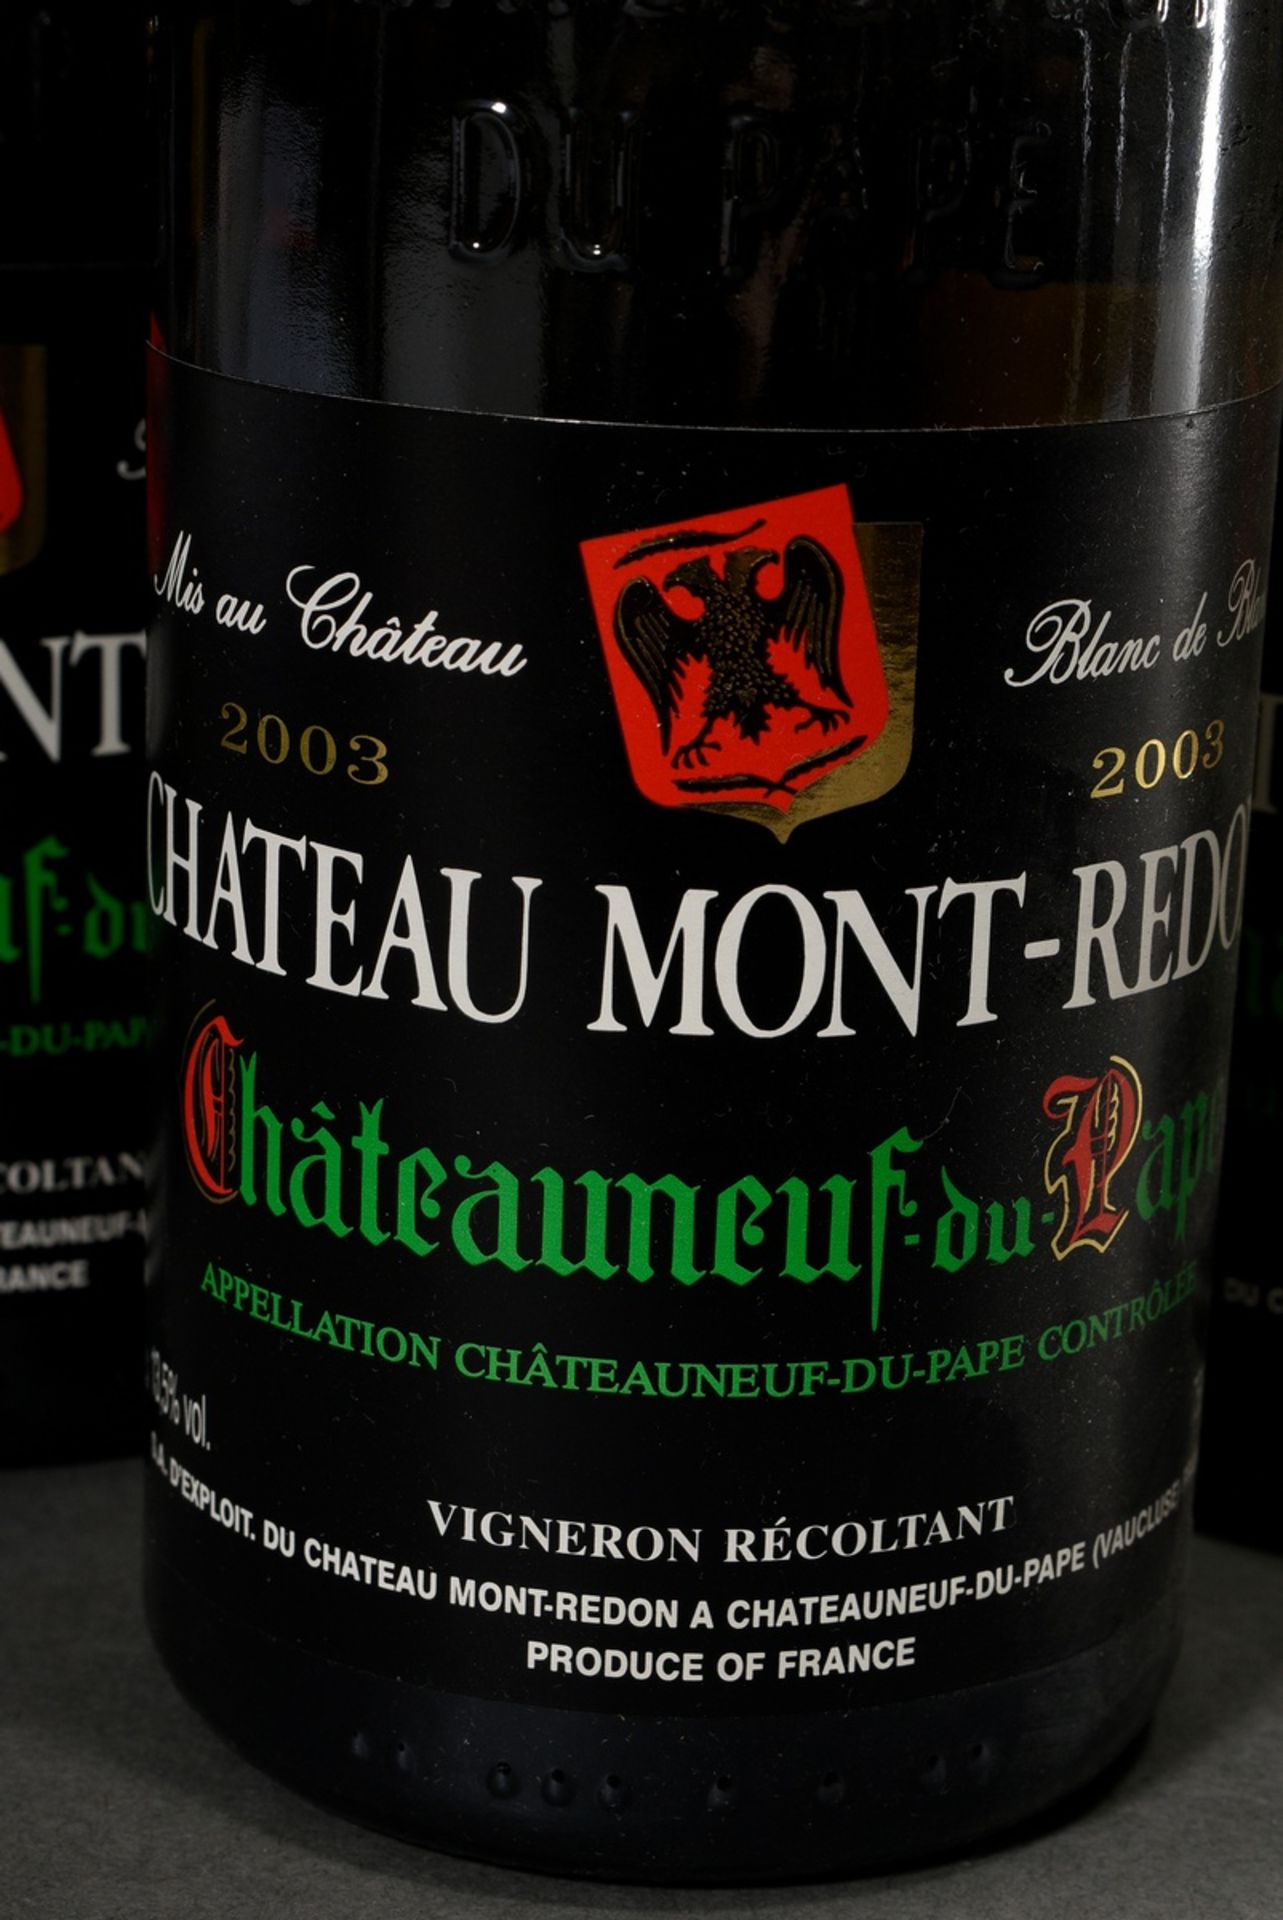 16 Bottles 2003 Chateau Mont-Redon, Chateauneuf du Pape blanc, white wine, Rhone, France, 0,75l, in - Image 2 of 4